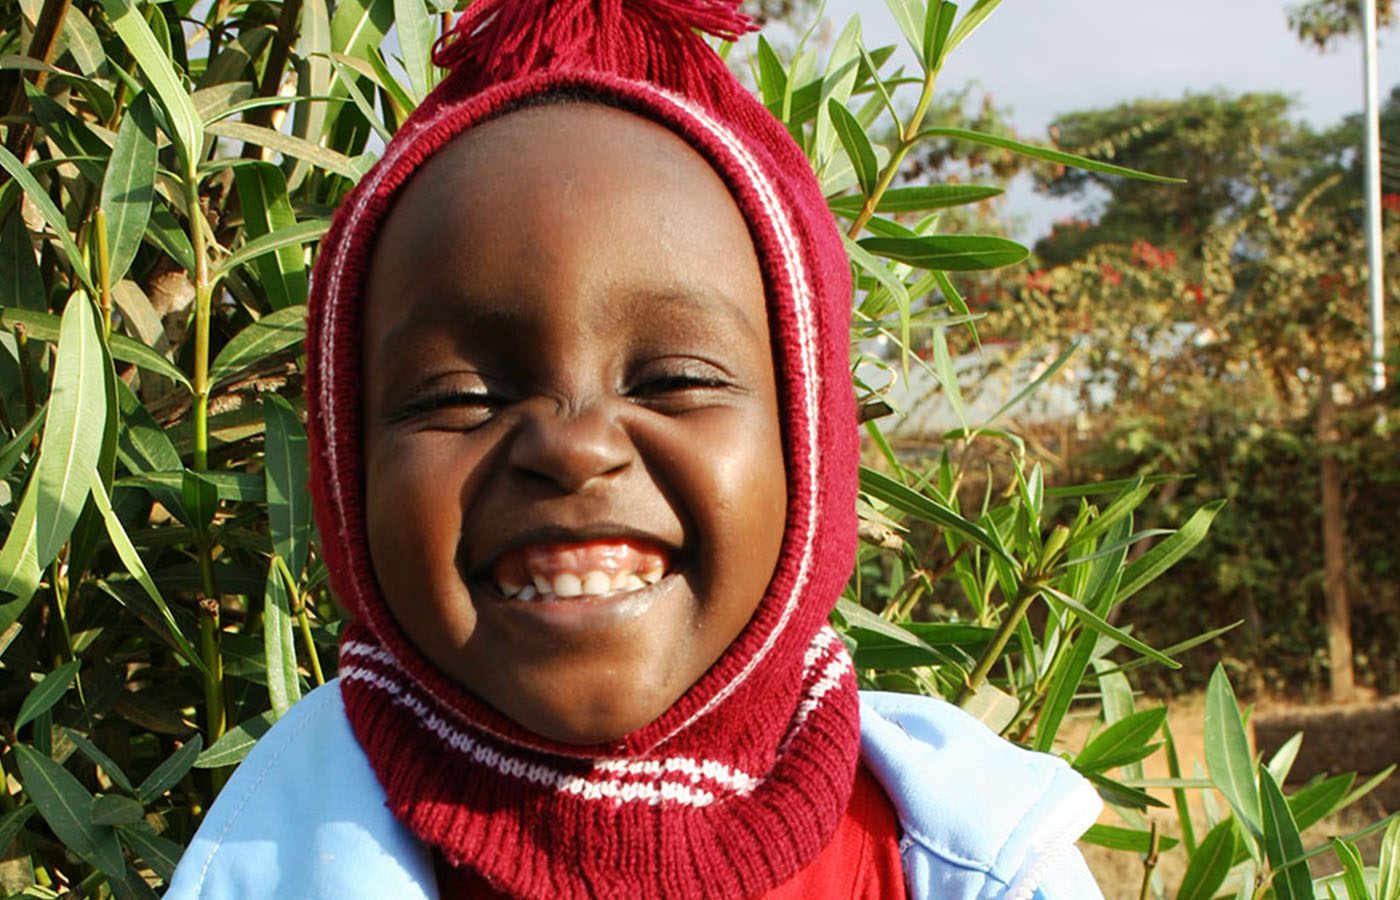 young girl in kenya wearing a knitted hat